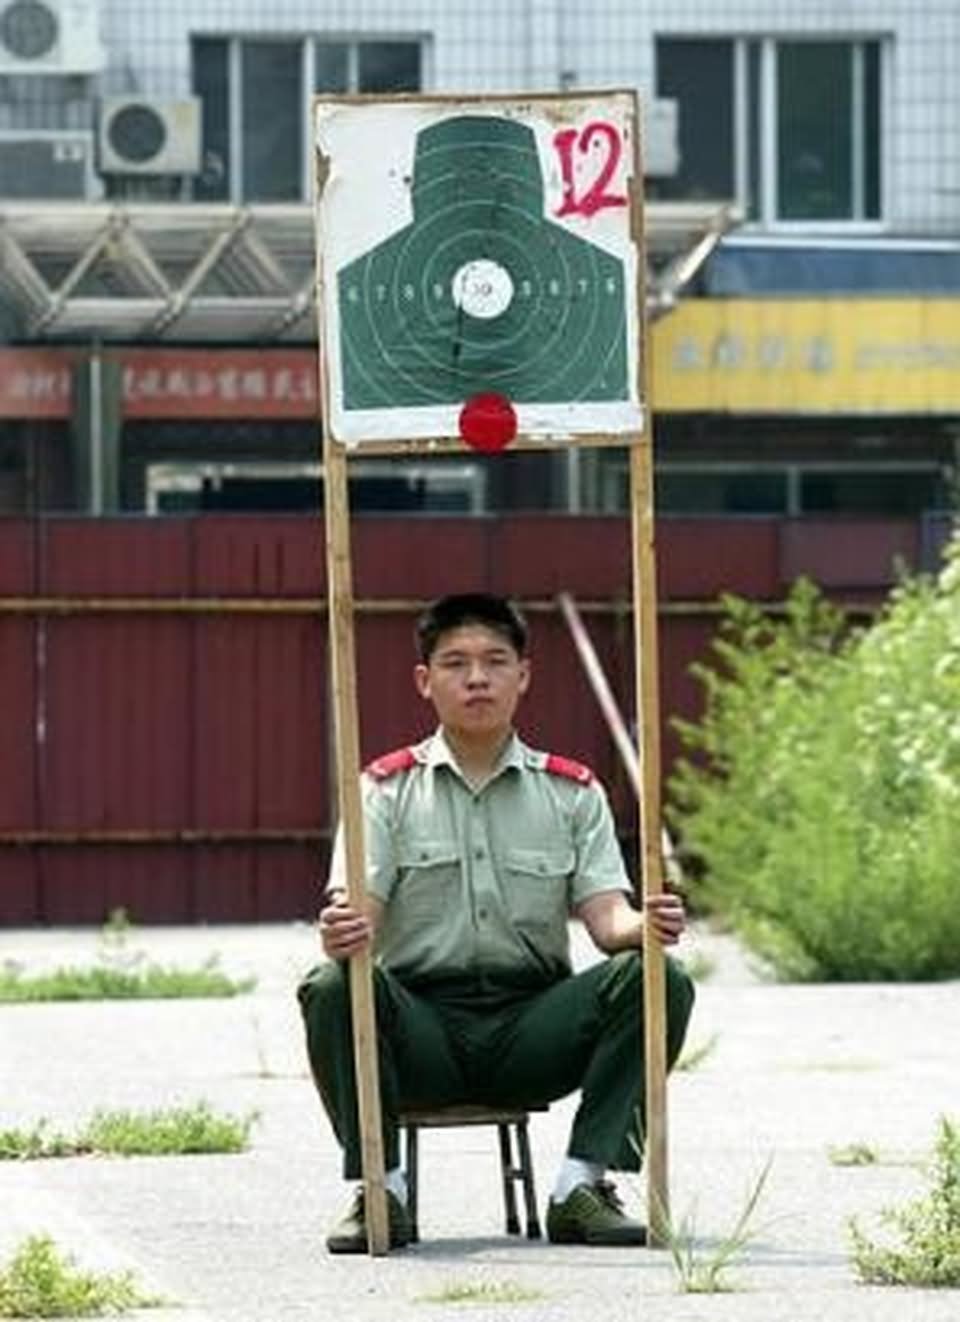 Funny Dangerous Military Target Board Picture